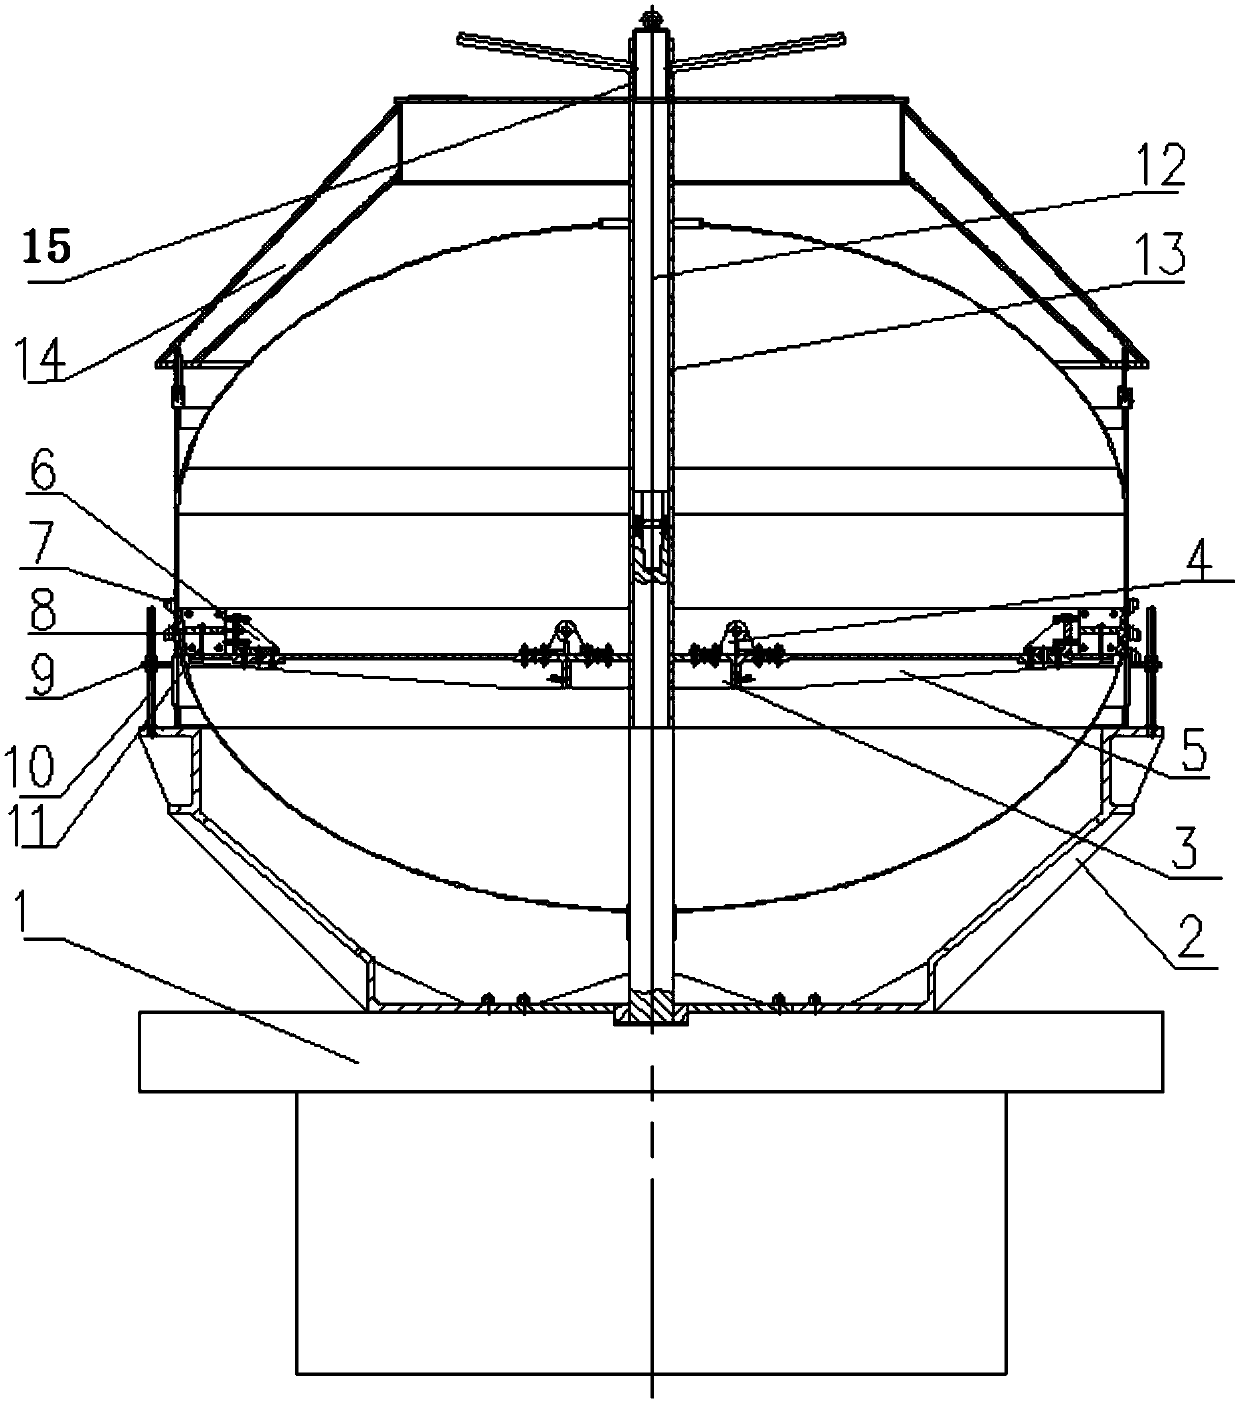 Centering butt joint positioning support device for vertical friction stir welding storage tank general assembly ring seam